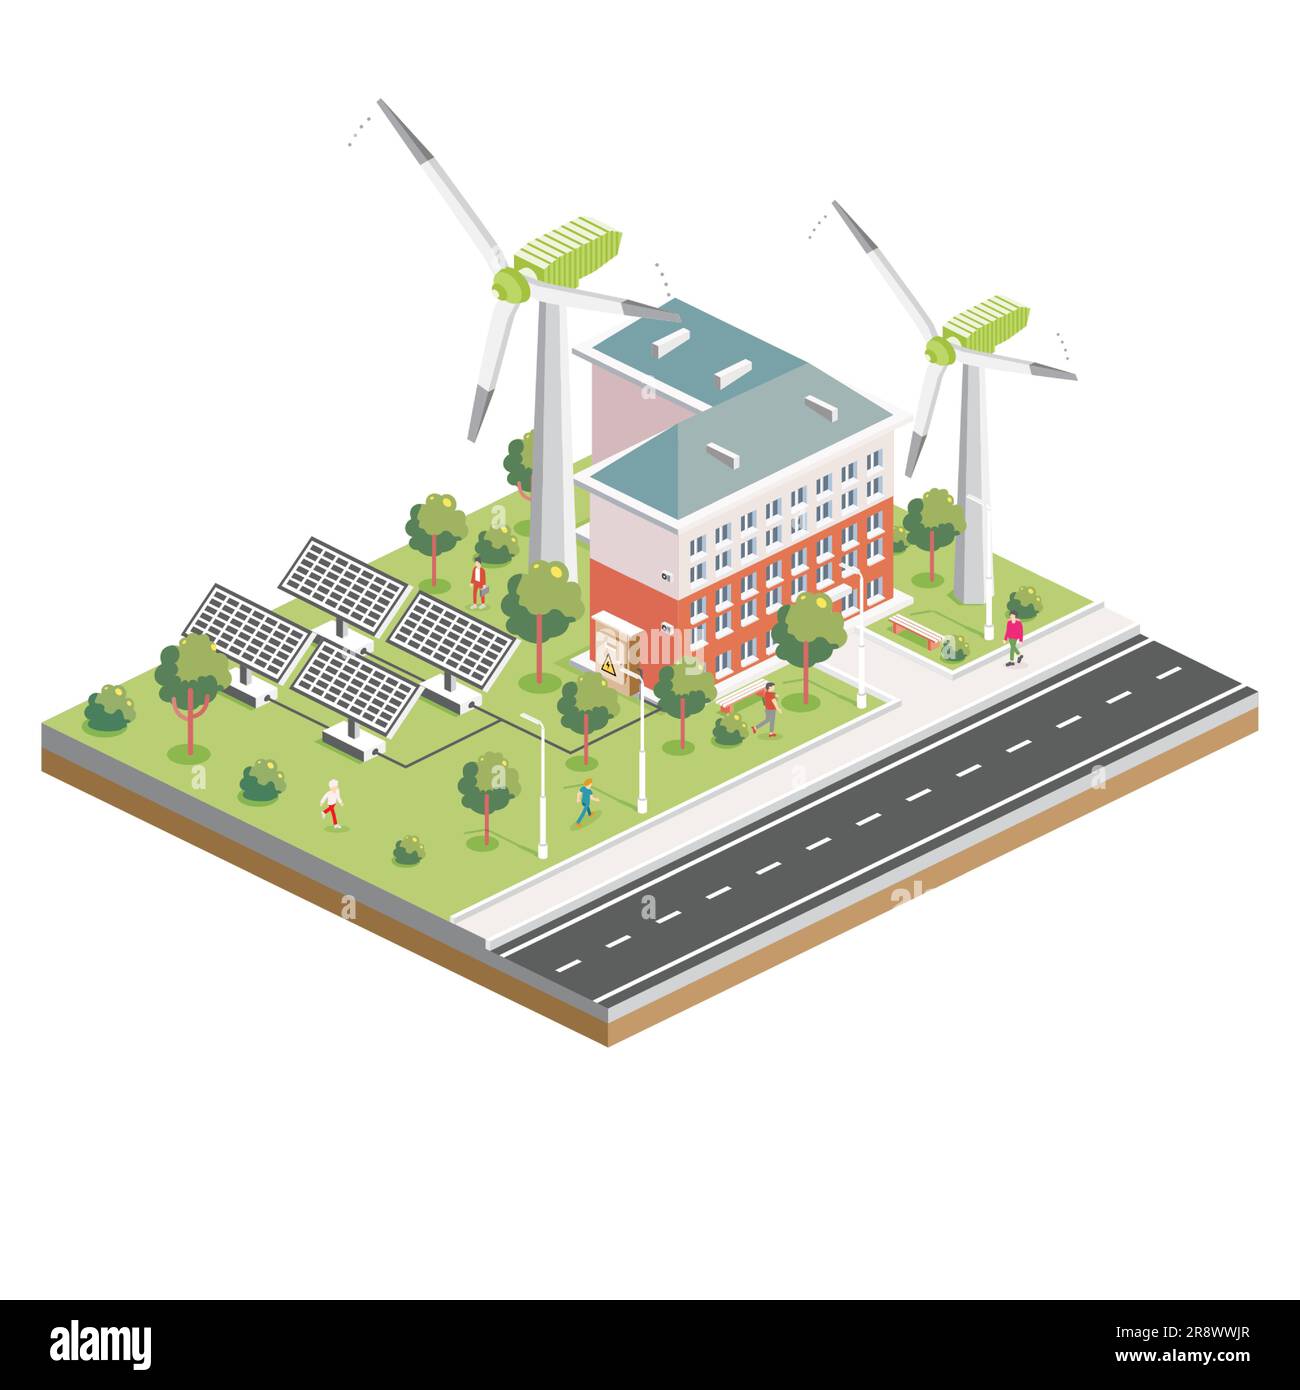 Isometric Solar Panels with Wind Turbine. Green Eco Friendly House. Infographic Element. Vector Illustration. City Architecture Isolated on White Back Stock Vector